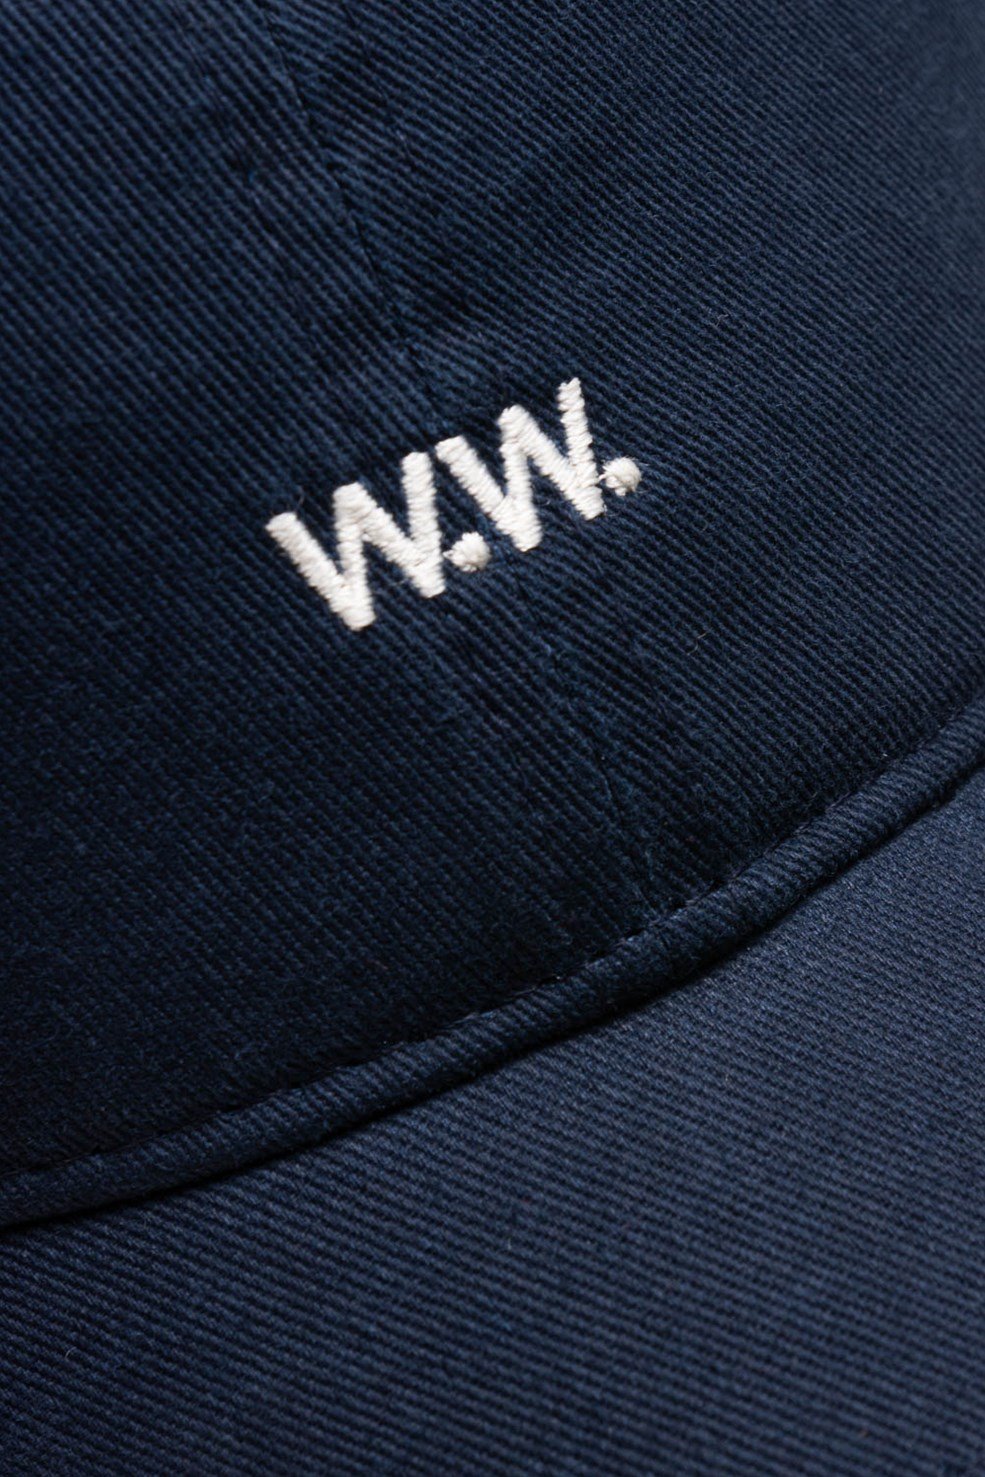 LOW PROFILE CAP IN NAVY BY WOOD WOOD